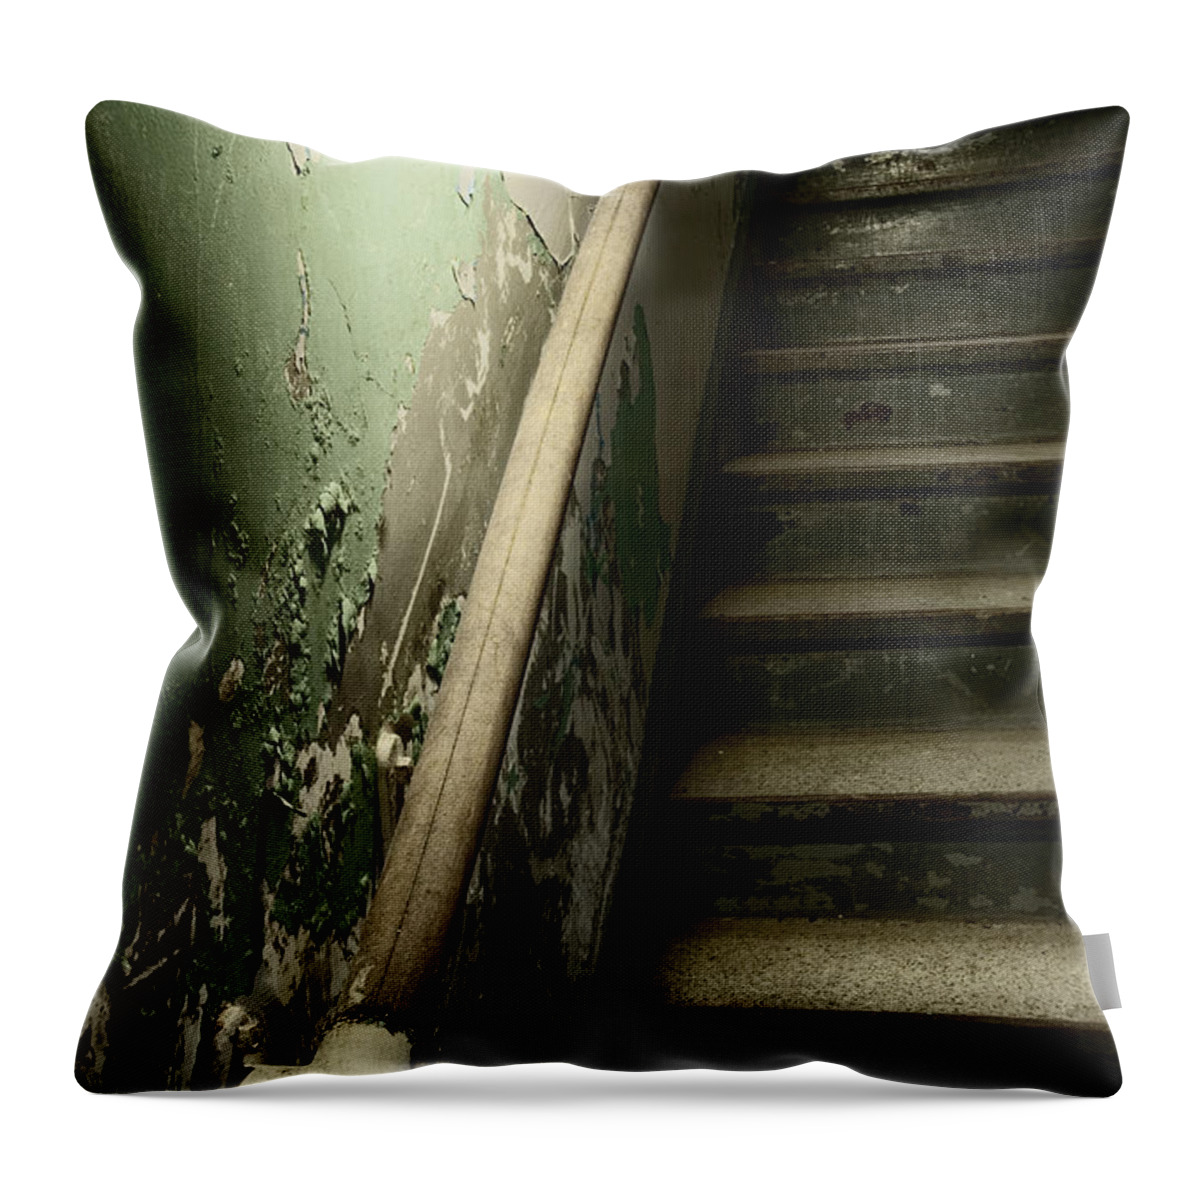 Stairs; Steps; Hall; Foyer; House; Home; Empty; Broken; Foreboding; Desolate; Alone; Death; Mysterious; Mystery; Eerie; Wood; Tile; Dirty; Old; Grunge; Interior; Inside; Indoors; Abandoned; Creepy; Danger; Dark; Door; Paint; Painted; Peeling; Chipped; Dark; Darkness Throw Pillow featuring the photograph Foreboding by Margie Hurwich